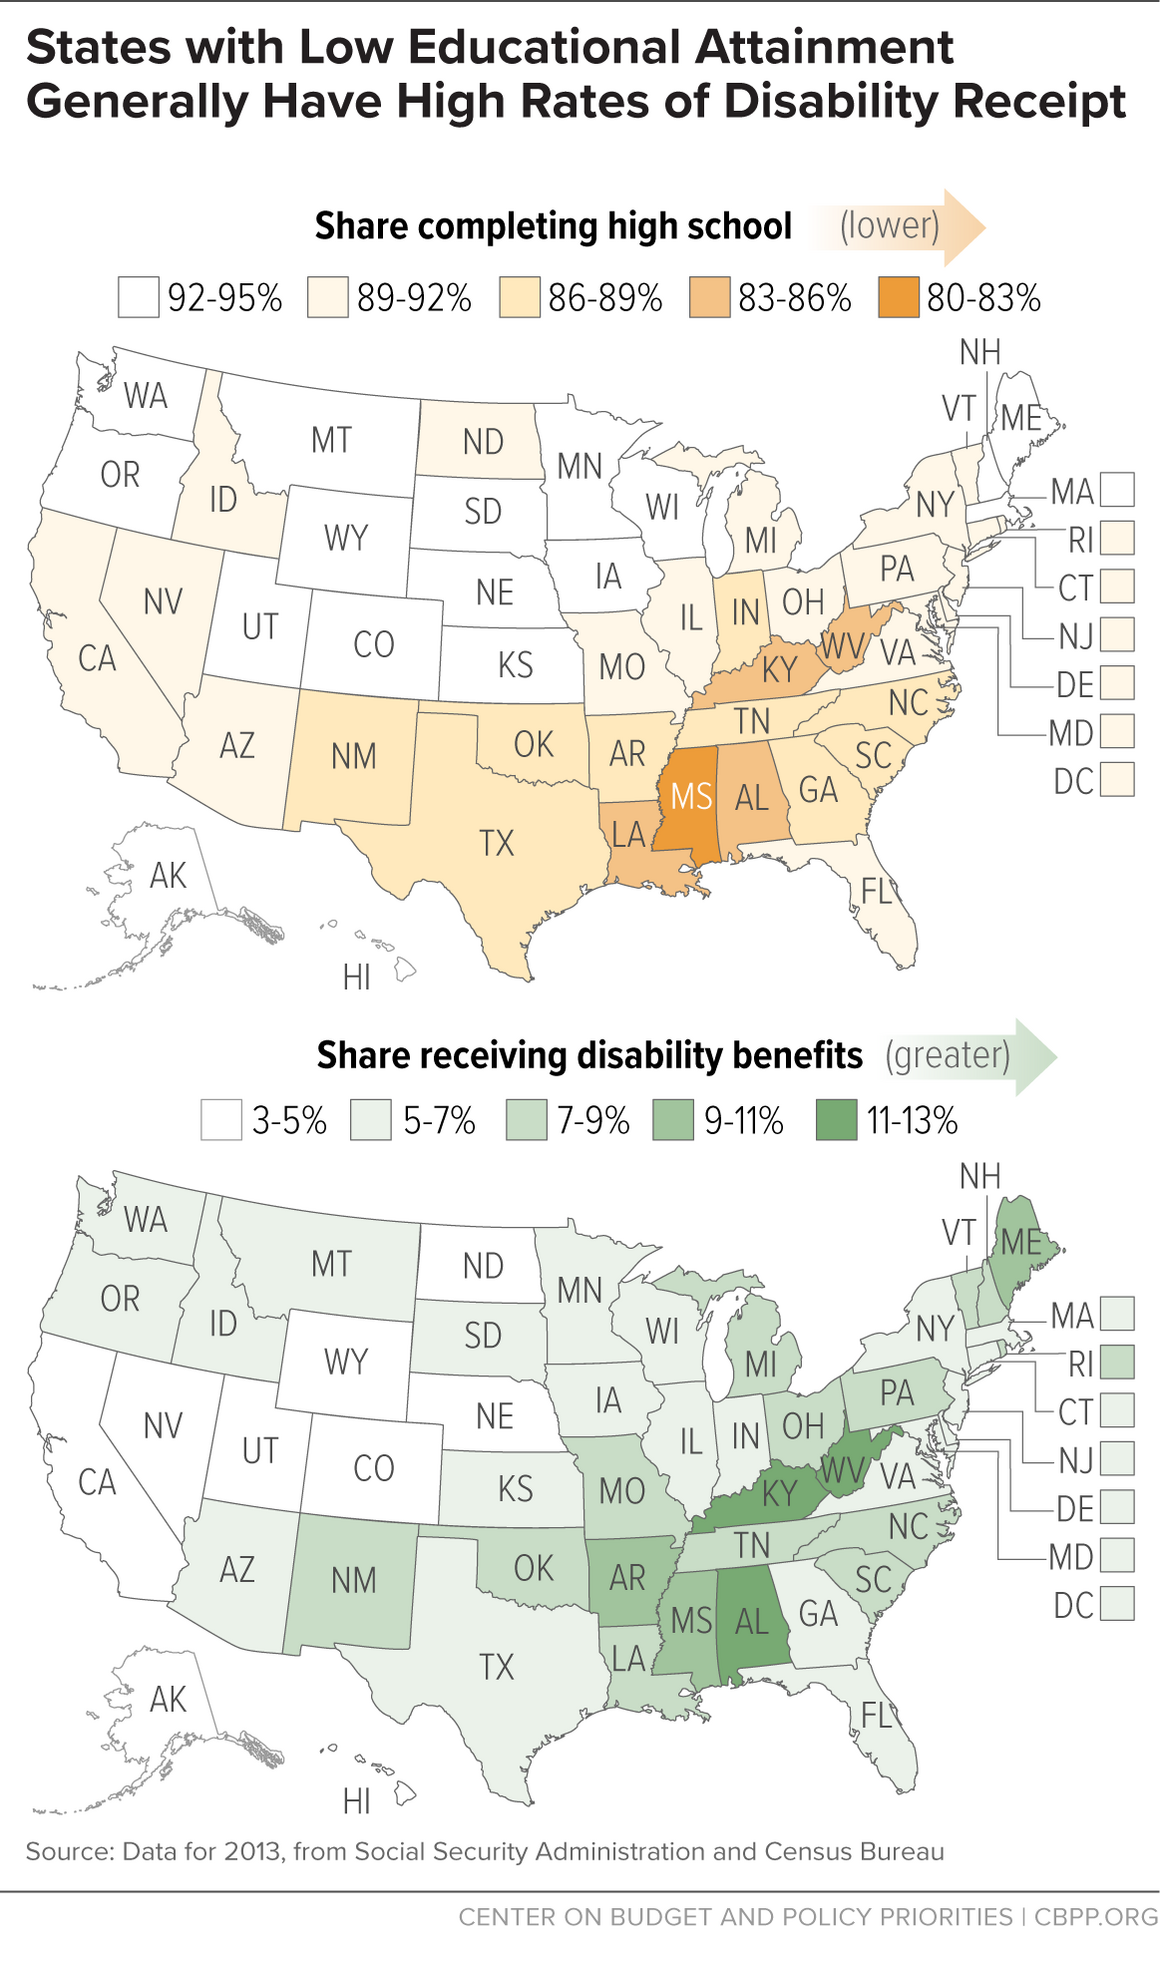 States with Low Educational Attainment Generally Have High Rates of Disability Receipt